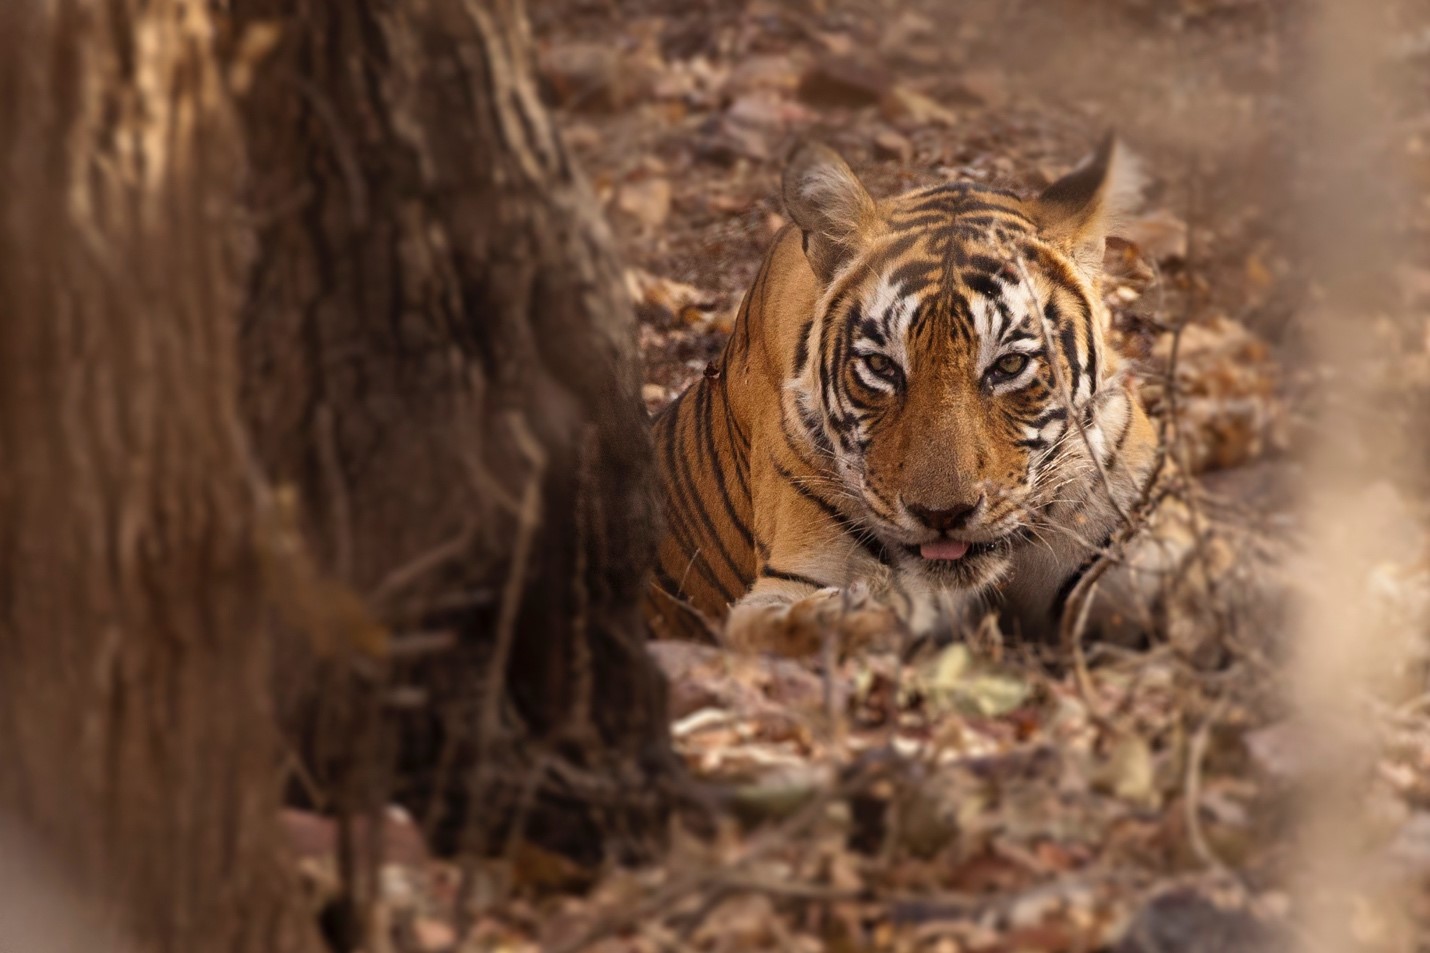 a lone tiger rests peacefully in the leaf litter in india